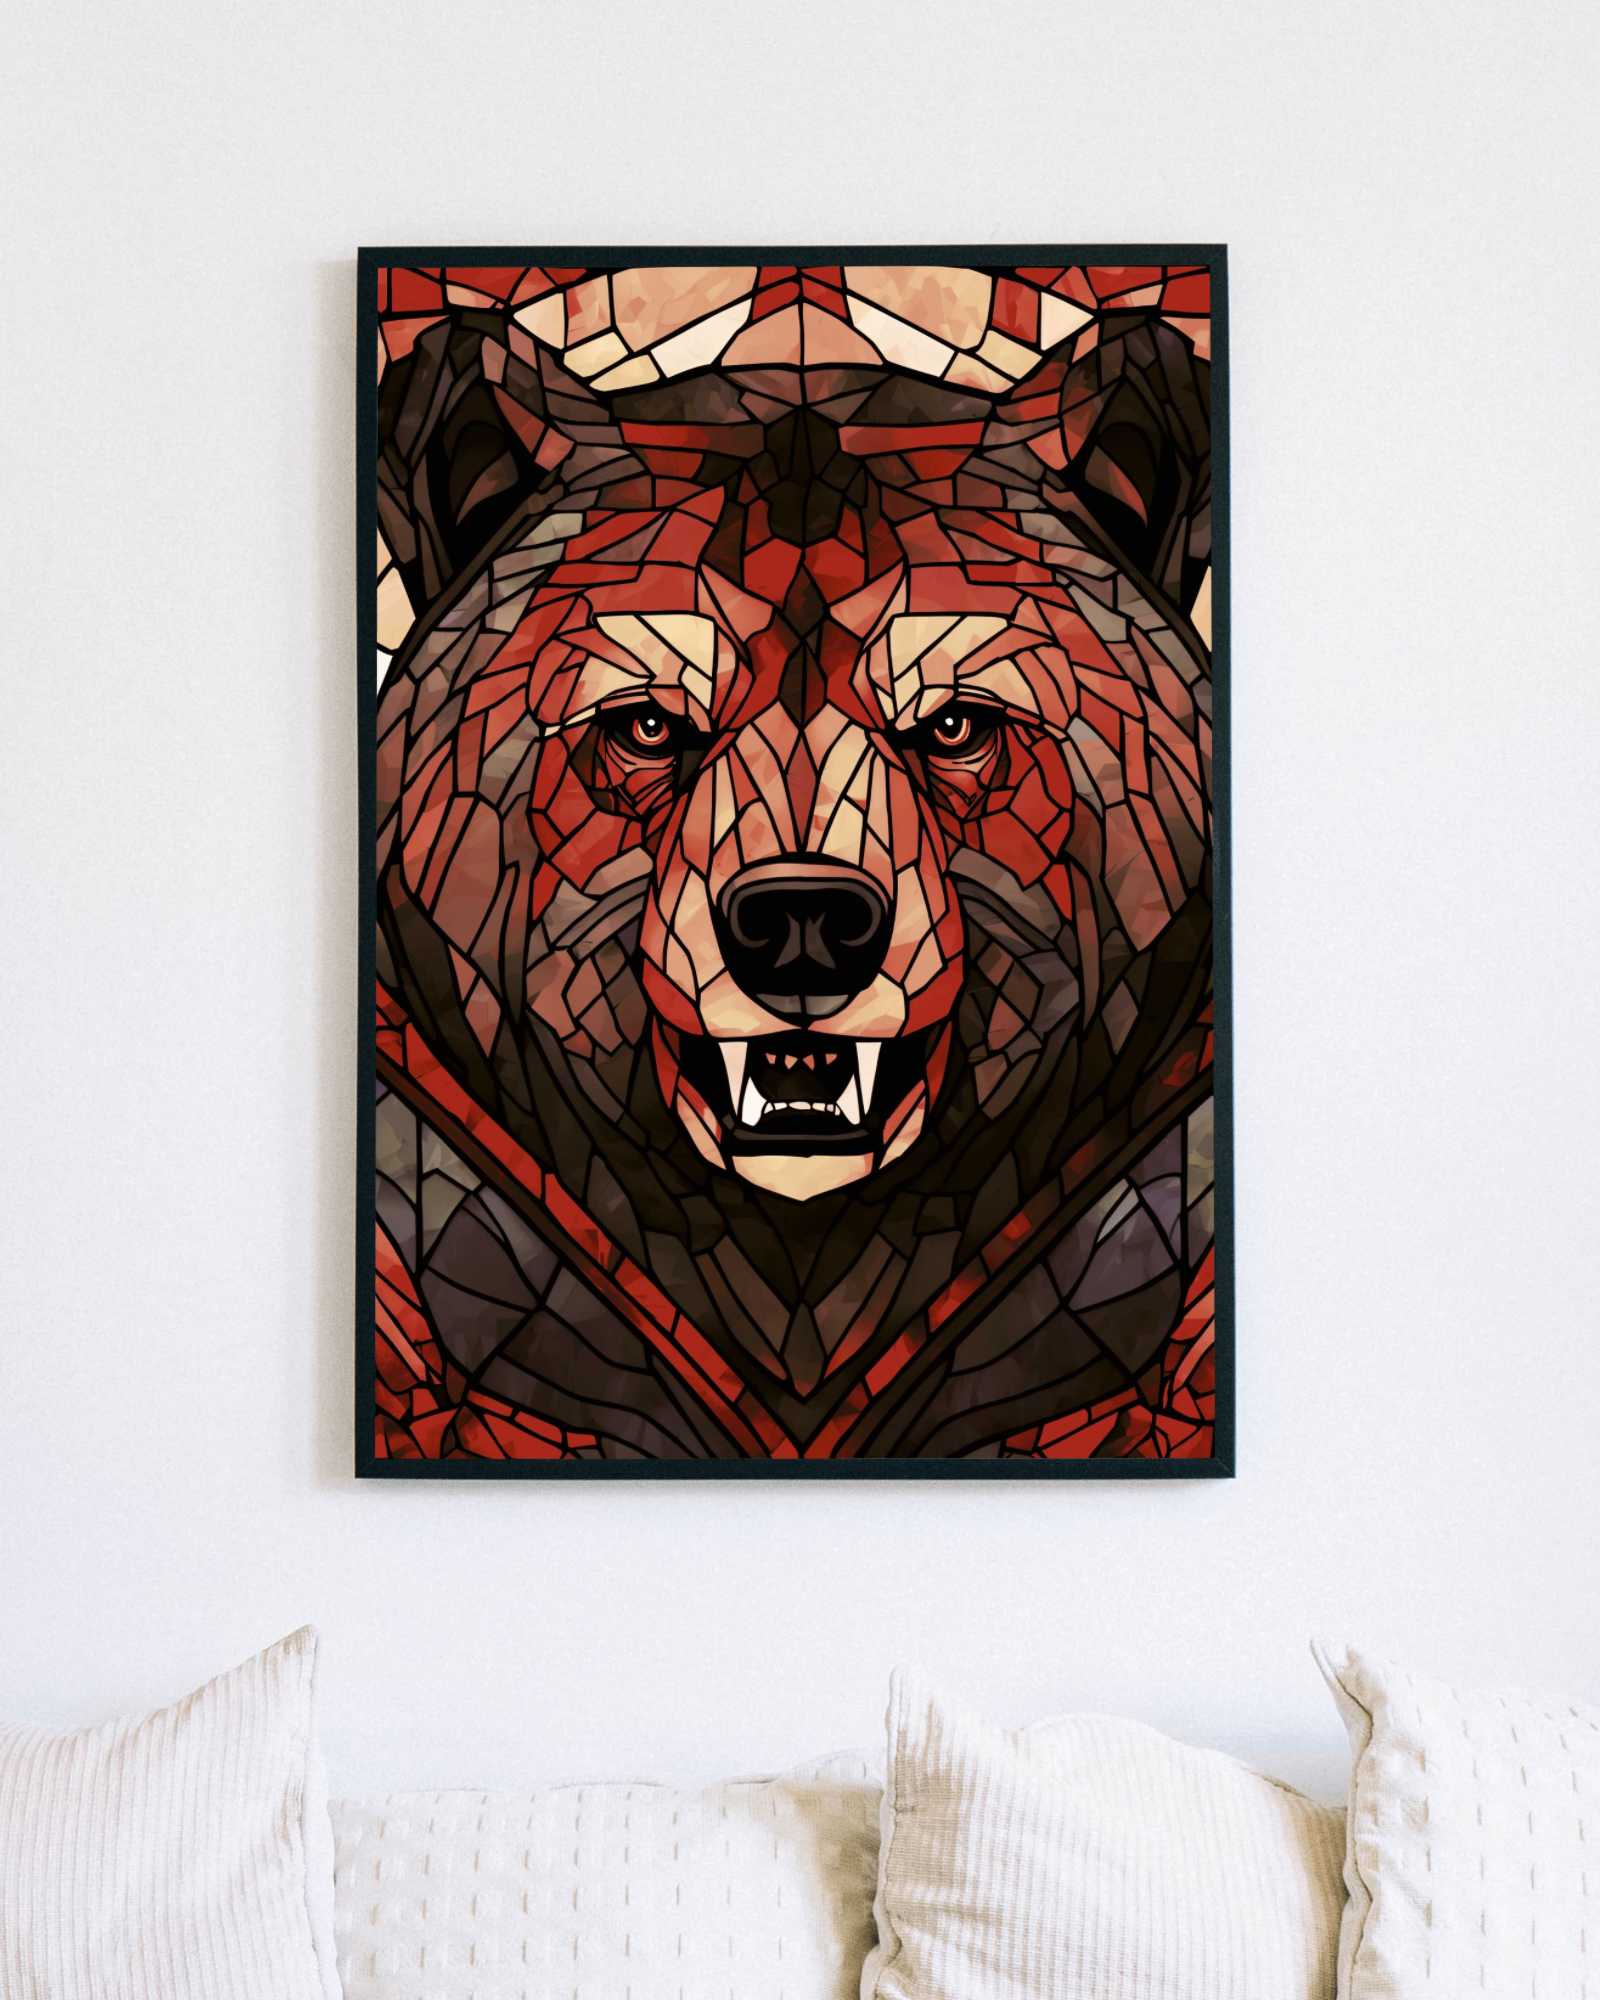 Crimson grizzly - Poster - Ever colorful